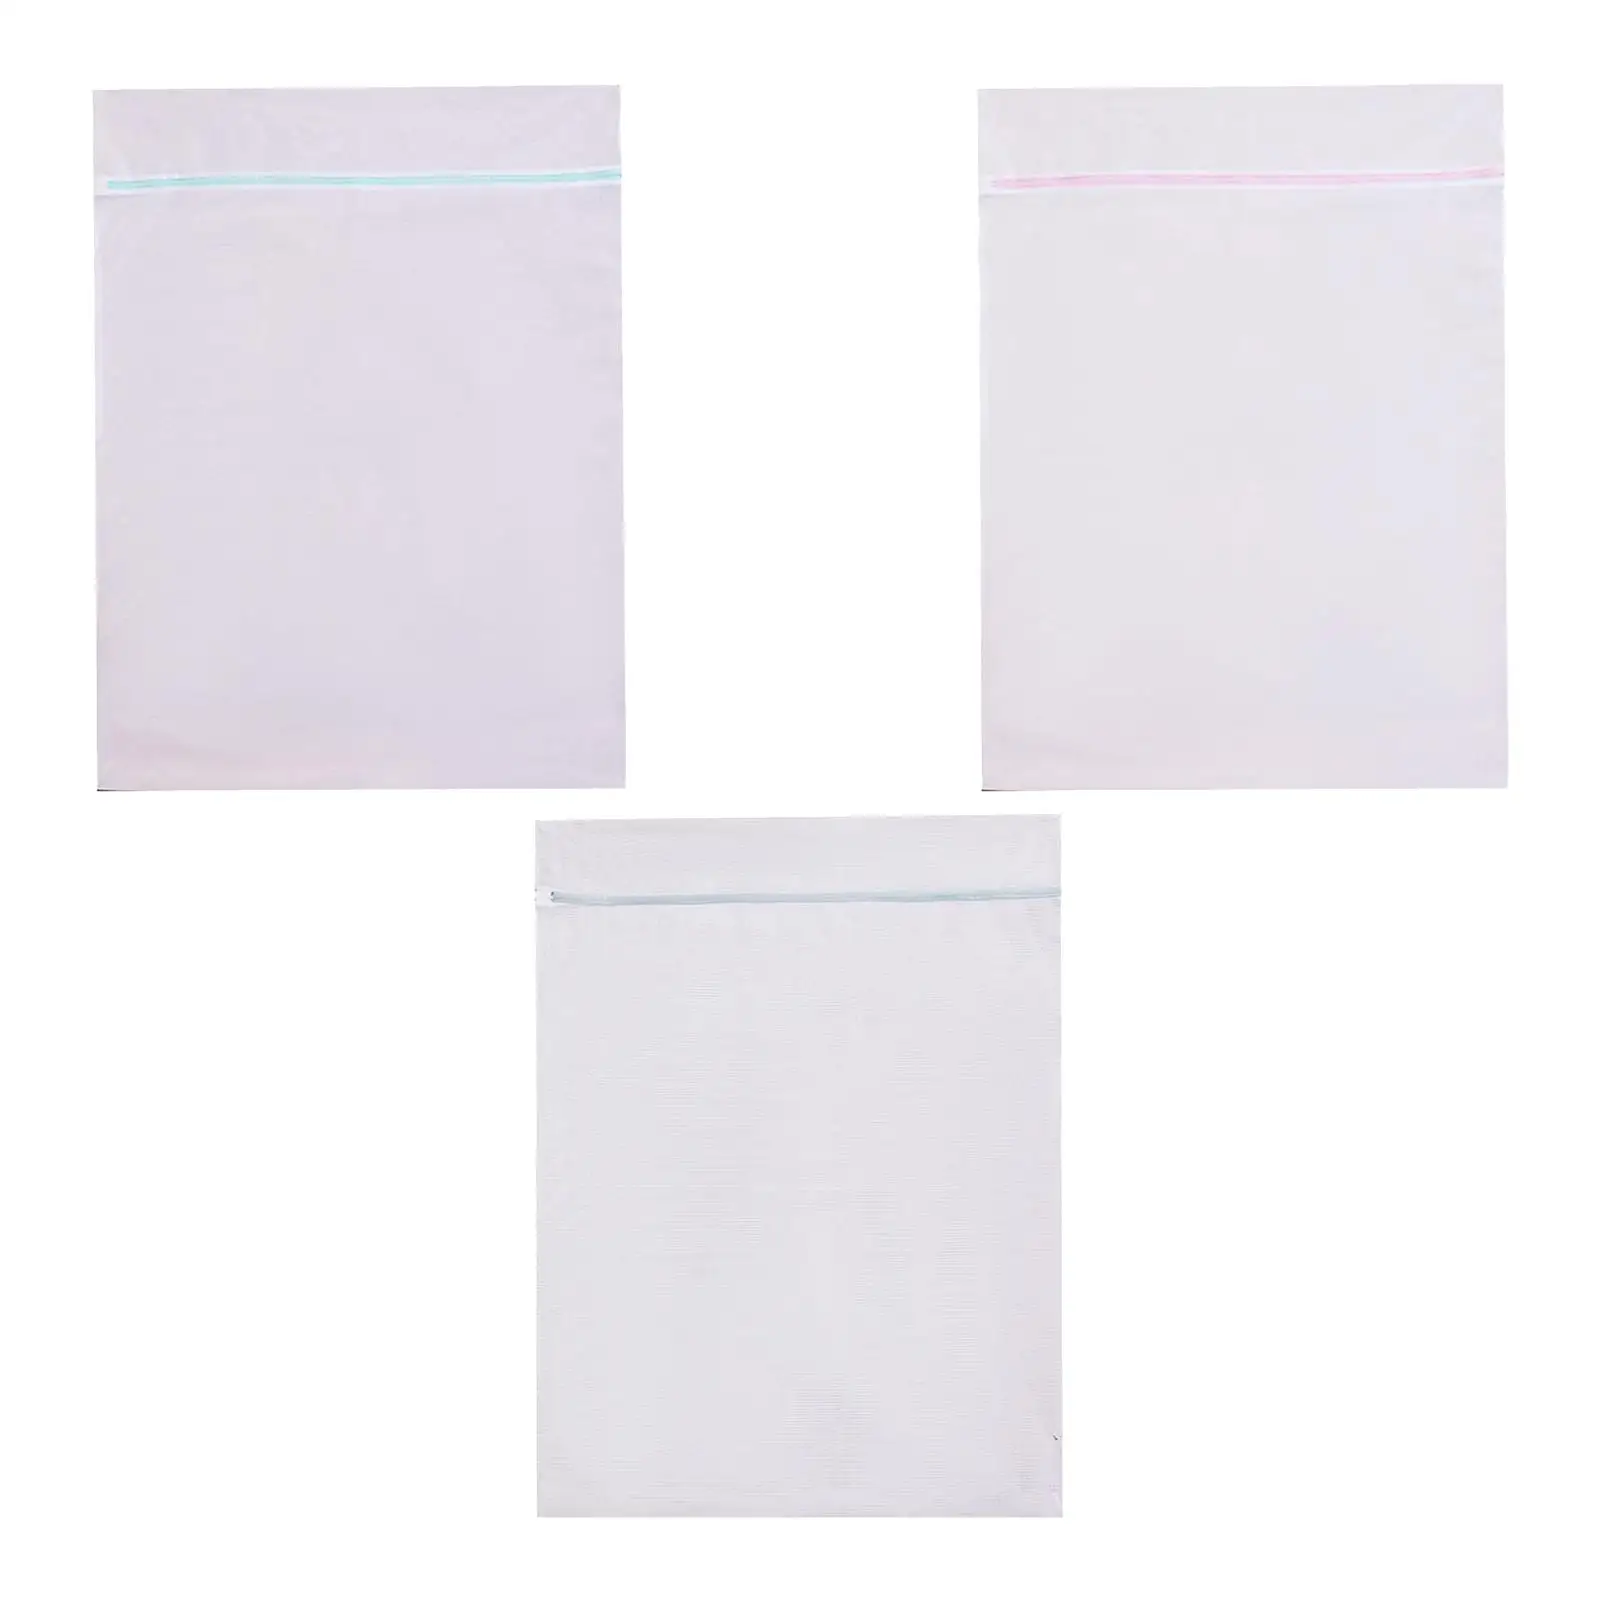 Laundry Bags for for Large Items Reusable 90x110cm Protective Polyester Mesh Laundry Bag Zipper Garment Washing Net Storage